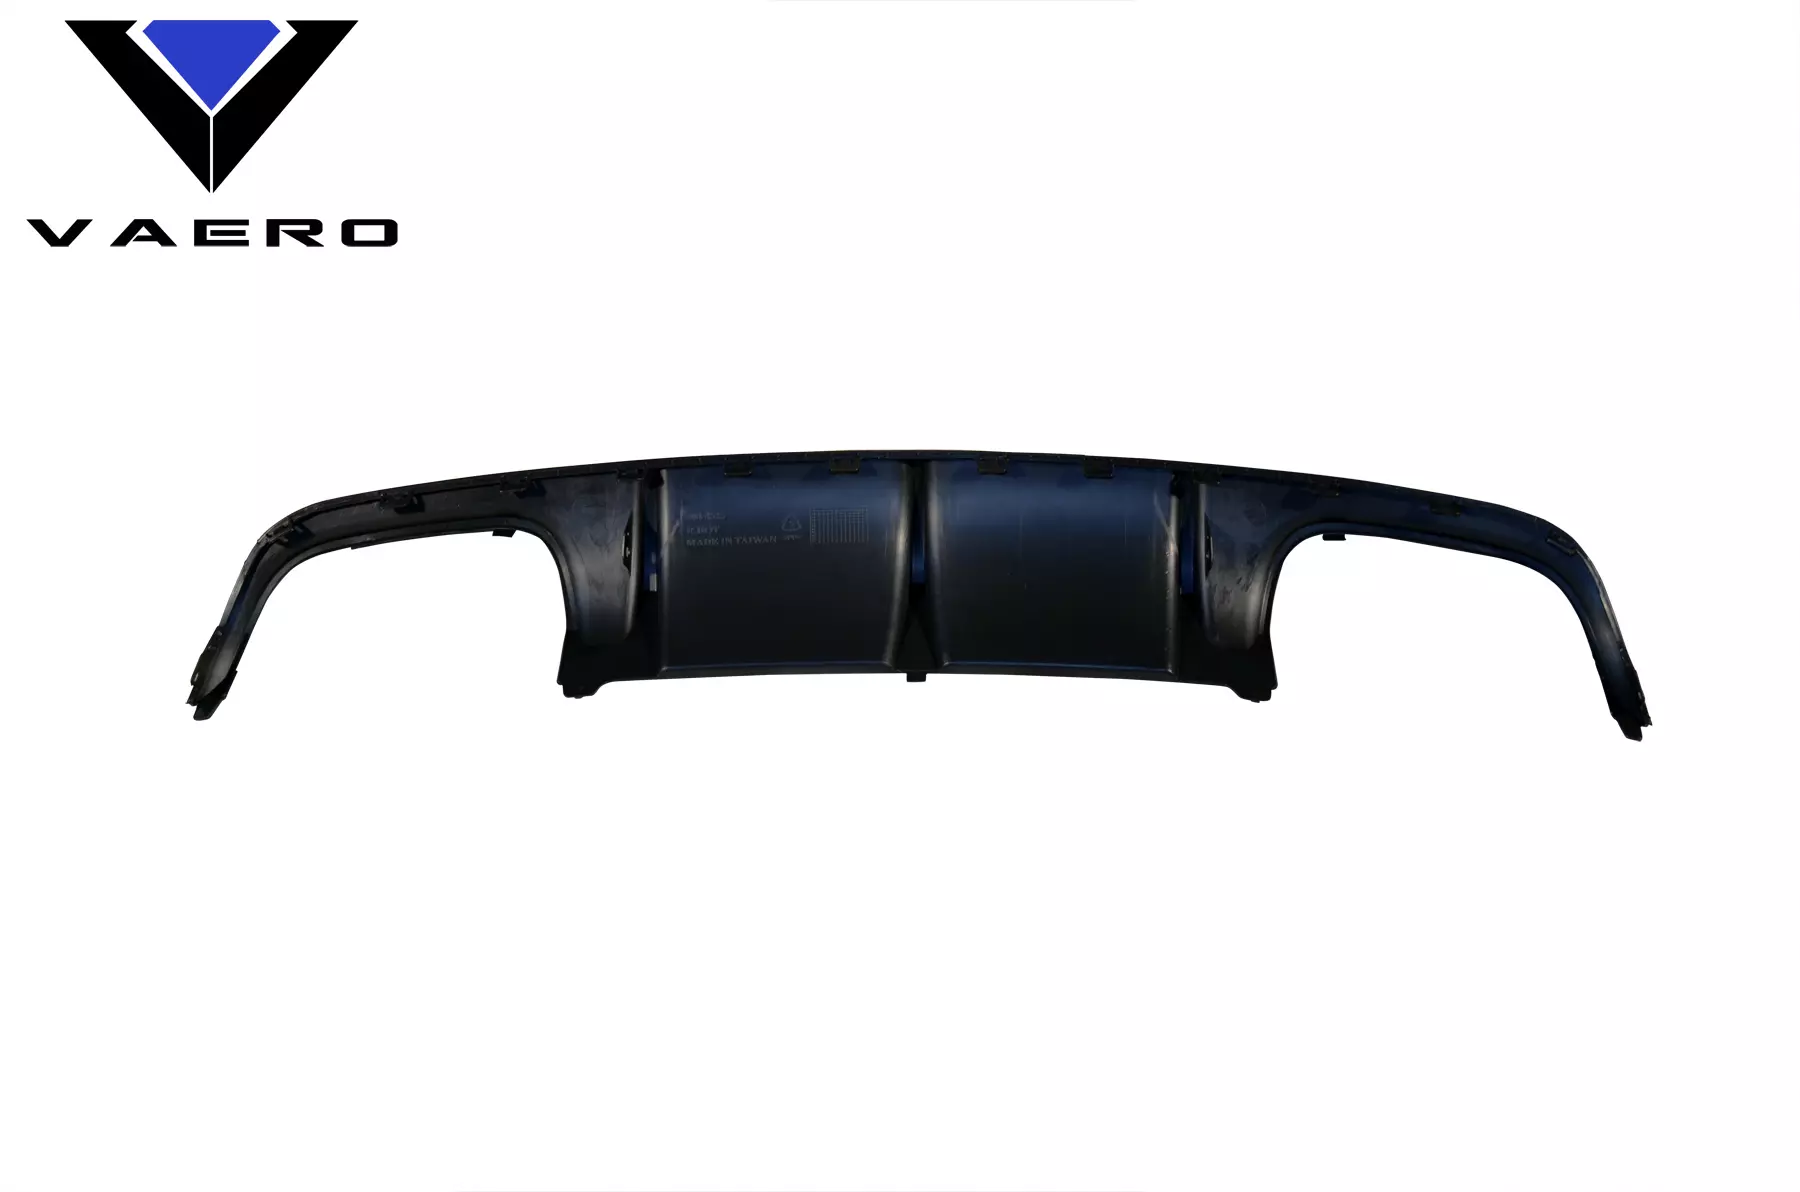 2008-2014 Mercedes C Class W204 Vaero C63 V1 Look Rear Bumper Cover ( with PDC ) 1 Piece (S) - Image 10